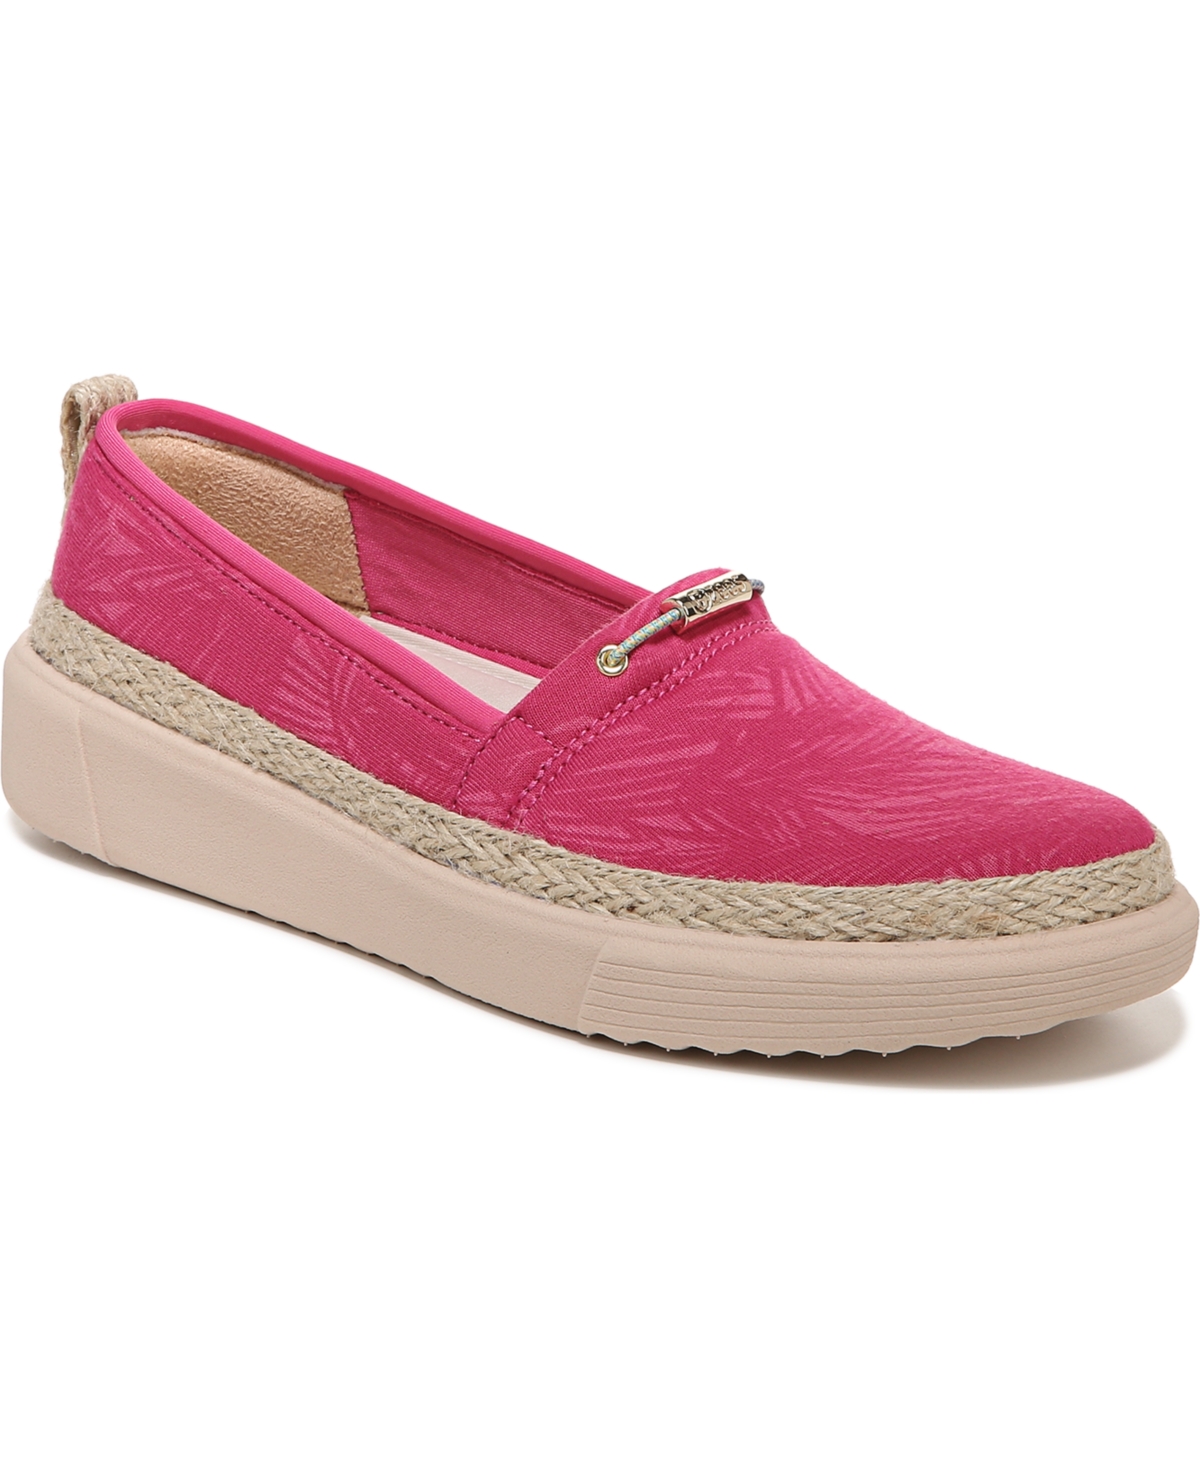 Bzees Premium Maui Washable Slip-ons In Pink Palm Fabric